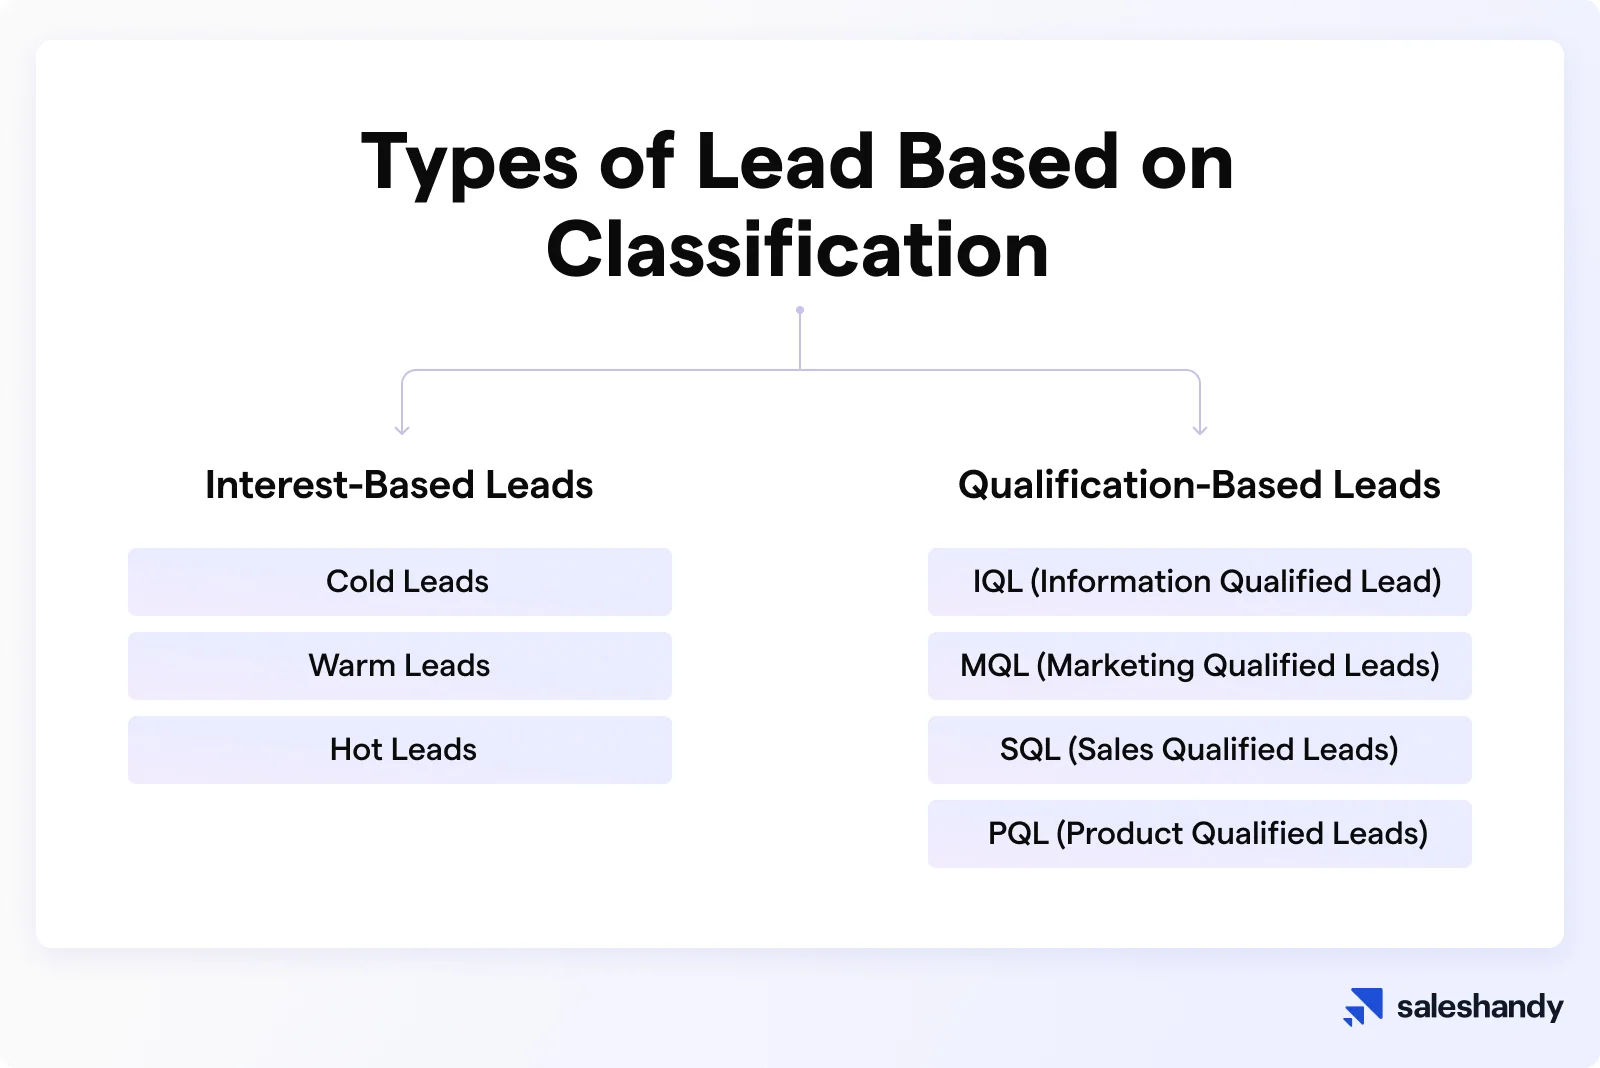 Types of leads